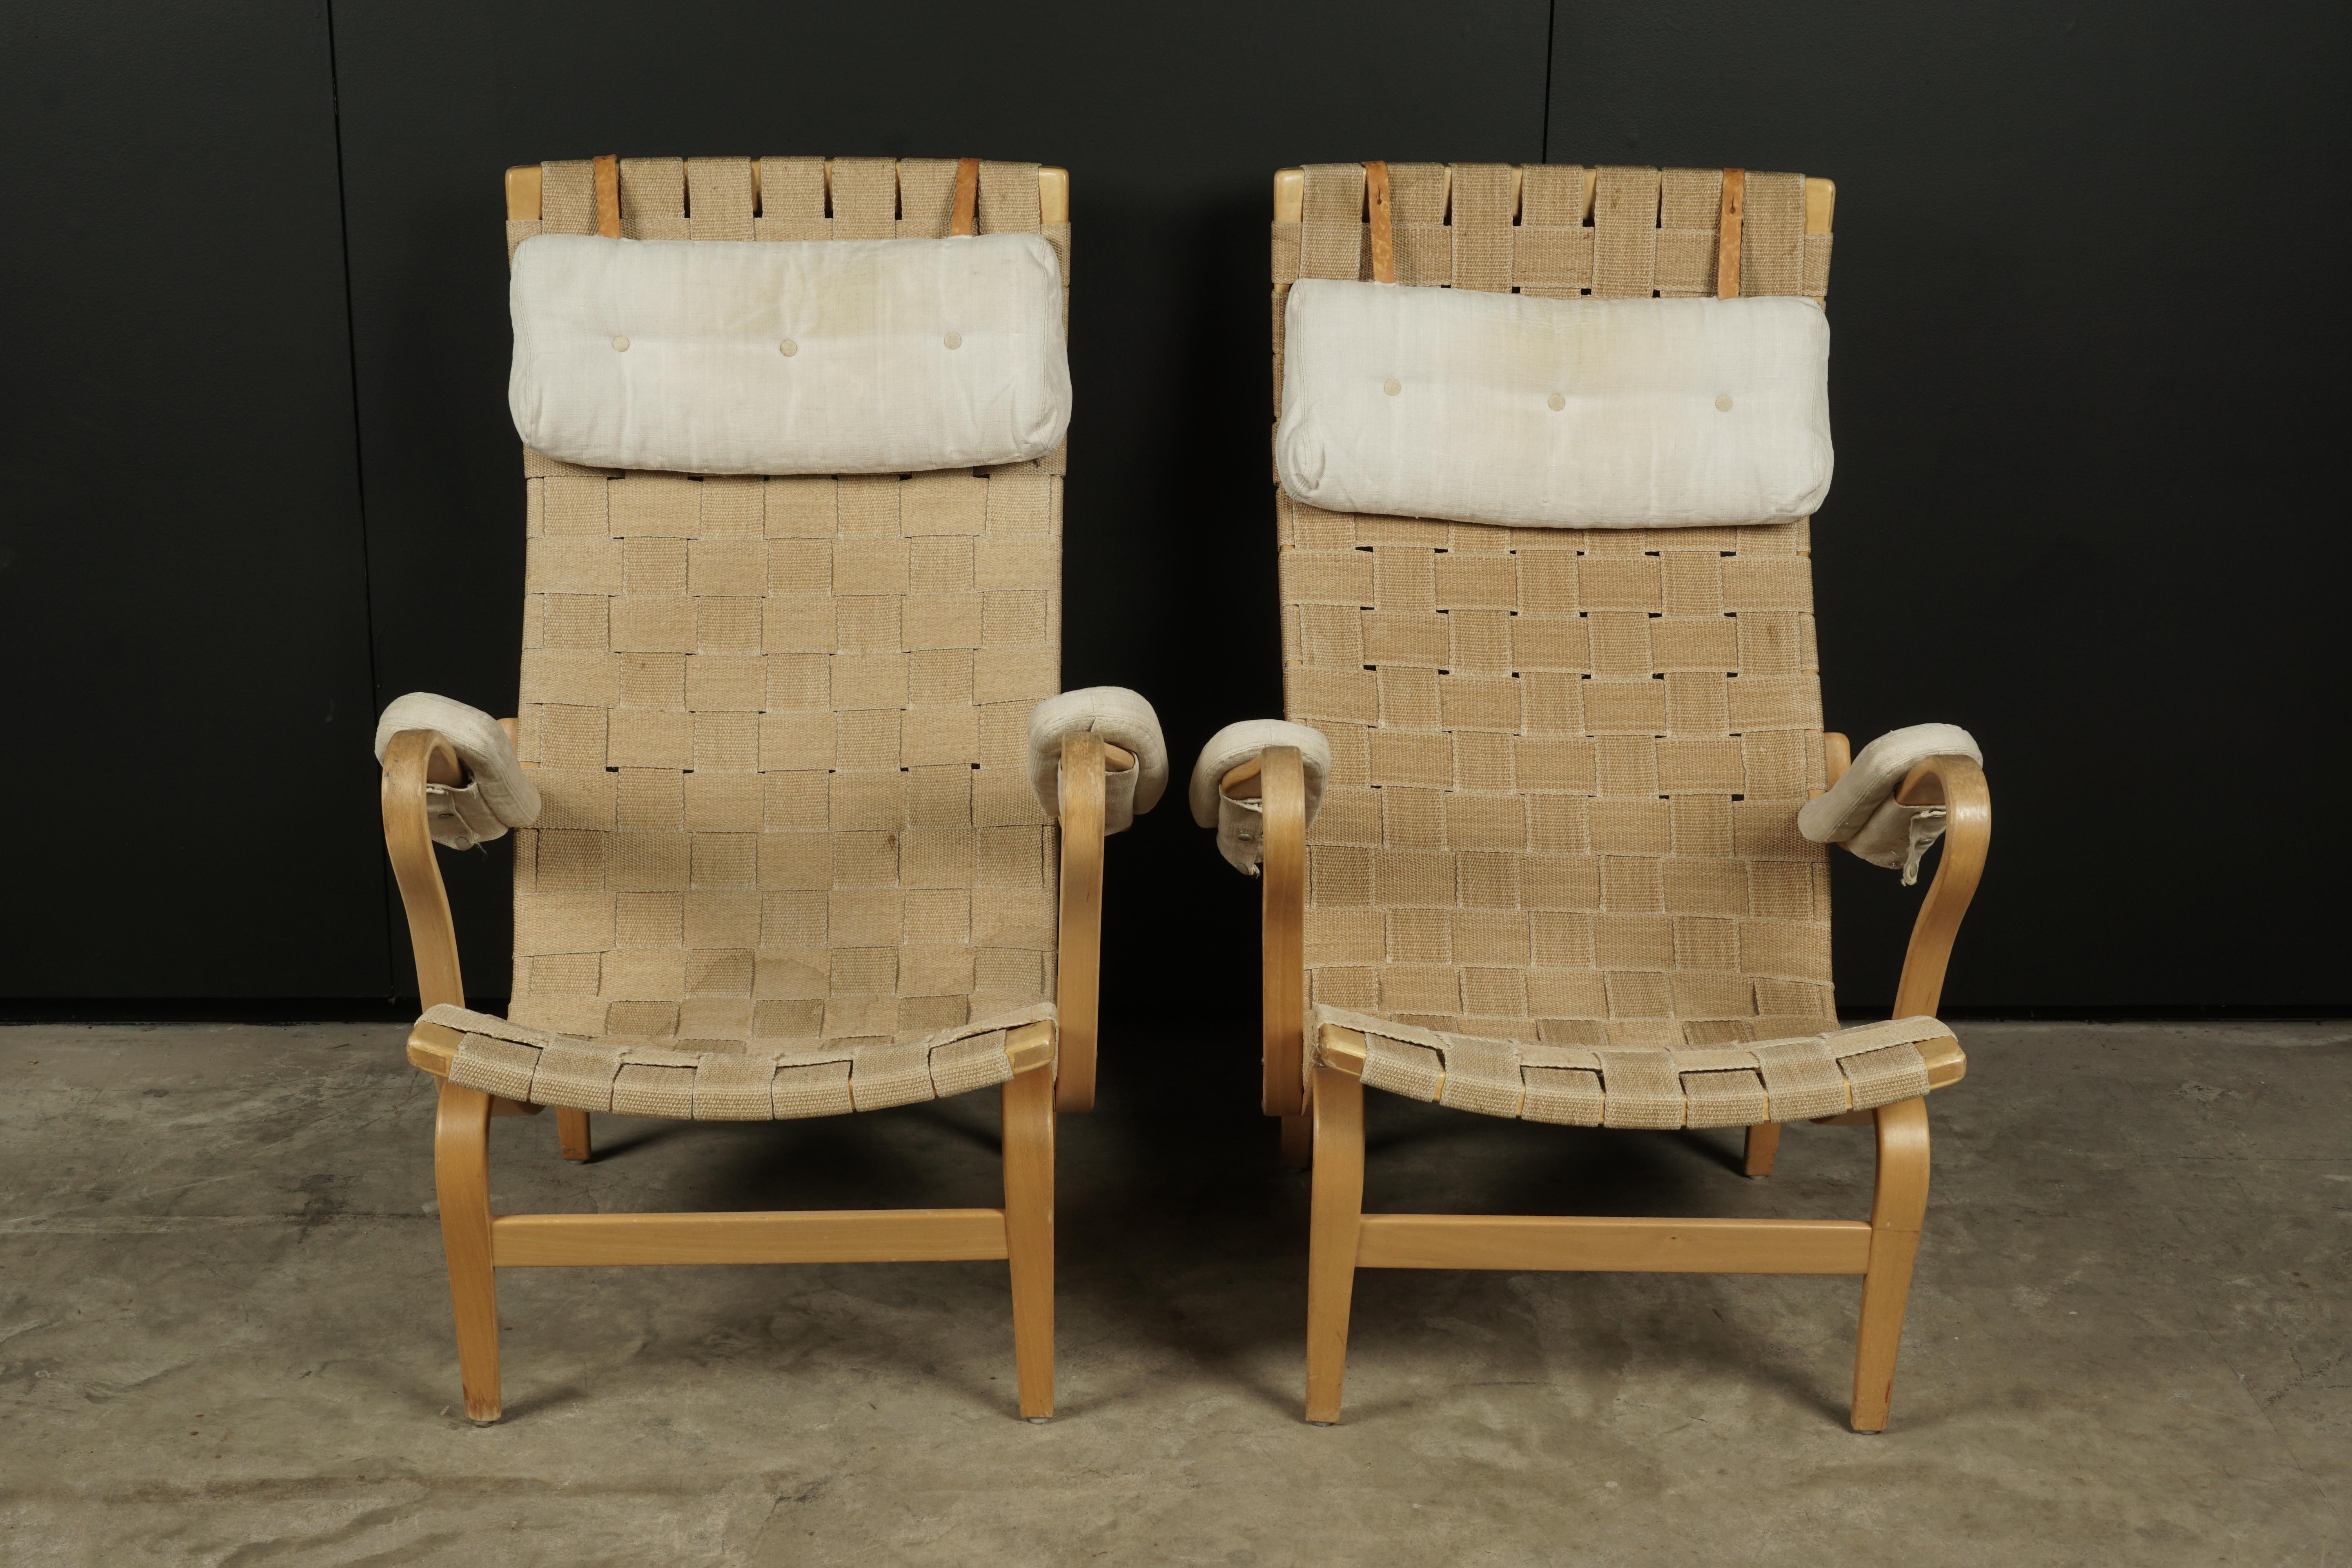 Vintage pair of Bruno Mathsson lounge chairs, Model Pernilla, circa 1970. Produced by Karl Mathsson AB in Värnamo, Sweden. Original canvas head and arm rests.